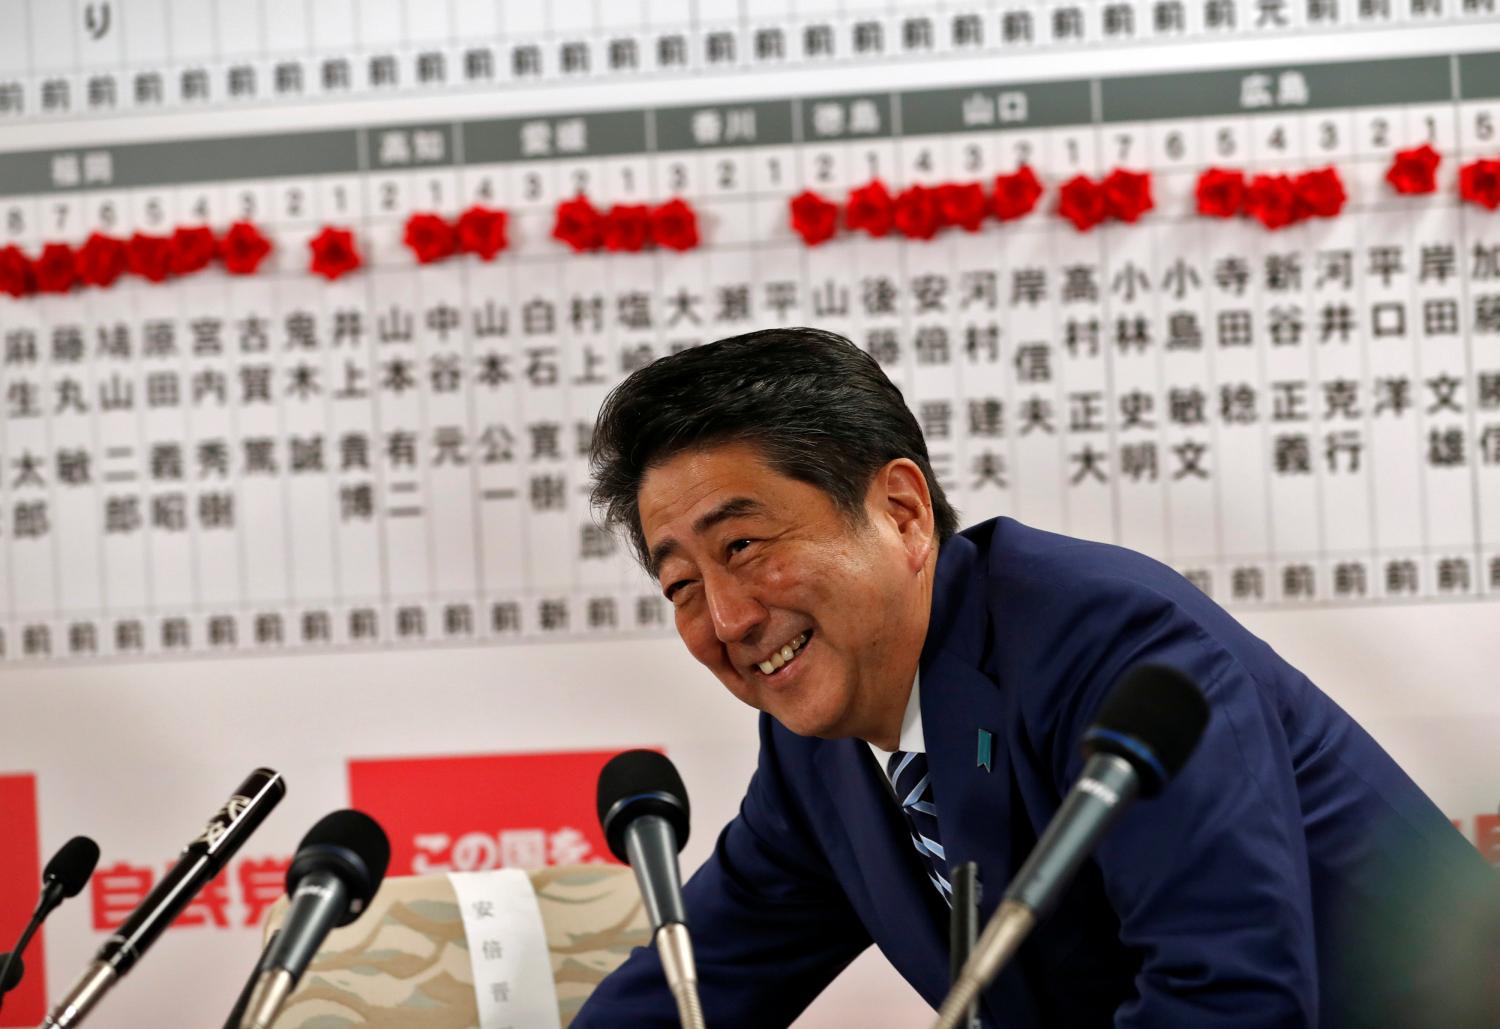 Japan's Prime Minister Shinzo Abe, leader of the Liberal Democratic Party (LDP), smiles during a news conference after Japan's lower house election, at the LDP headquarters in Tokyo, Japan October 22, 2017. REUTERS/Kim Kyung-Hoon - RC16A76A3030